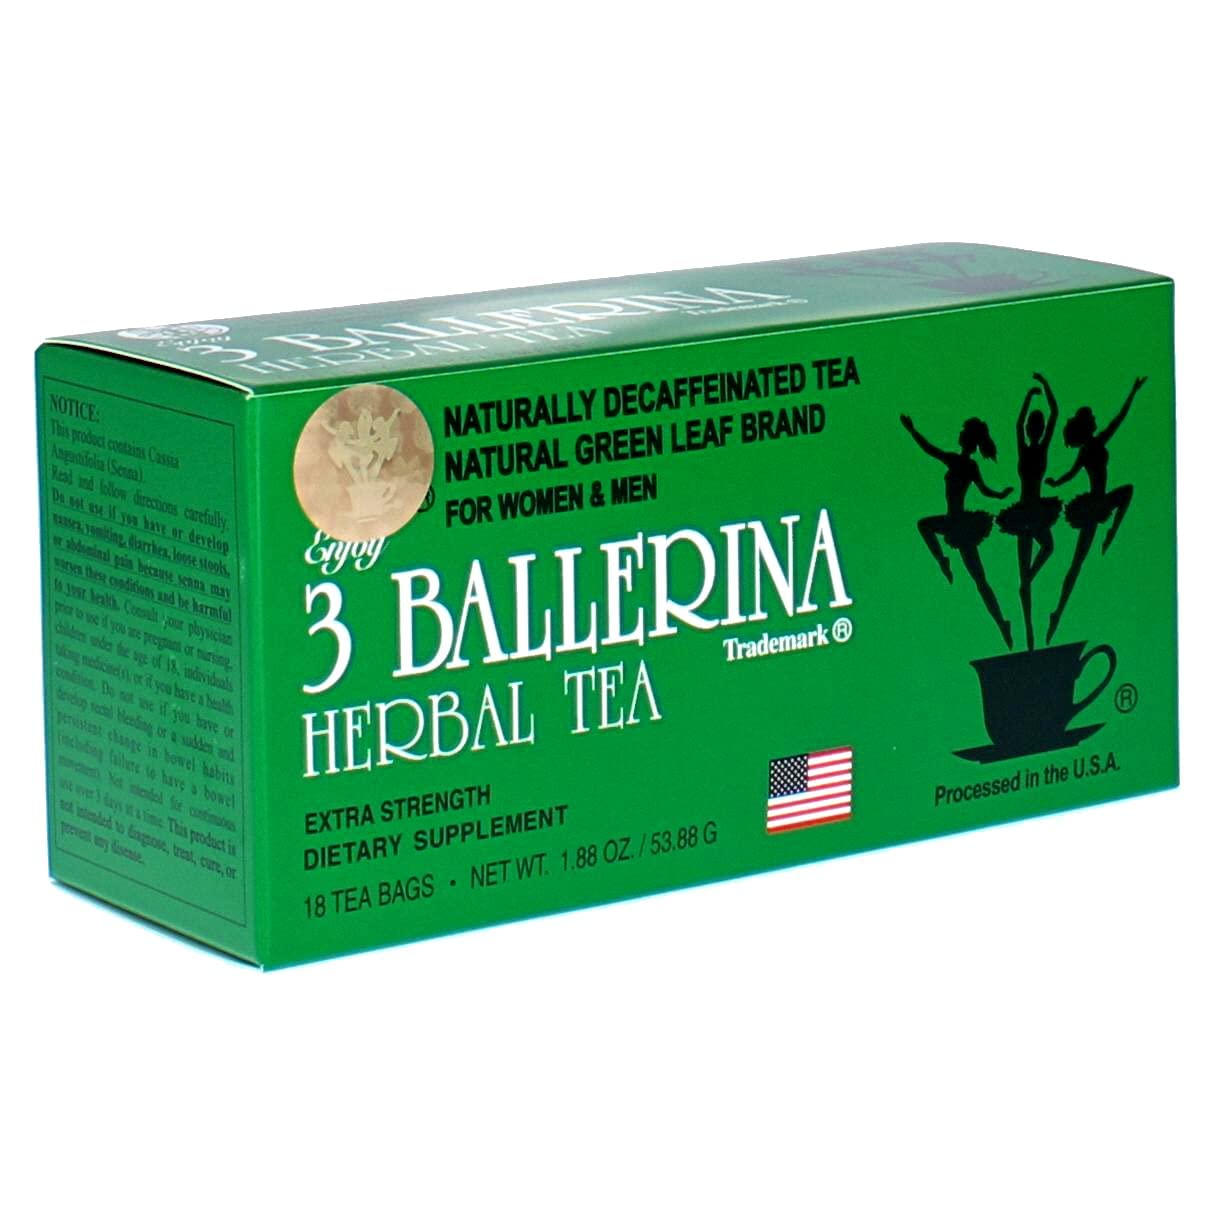 Discover The Secret Behind 3 Ballerina Tea's Amazing Results!